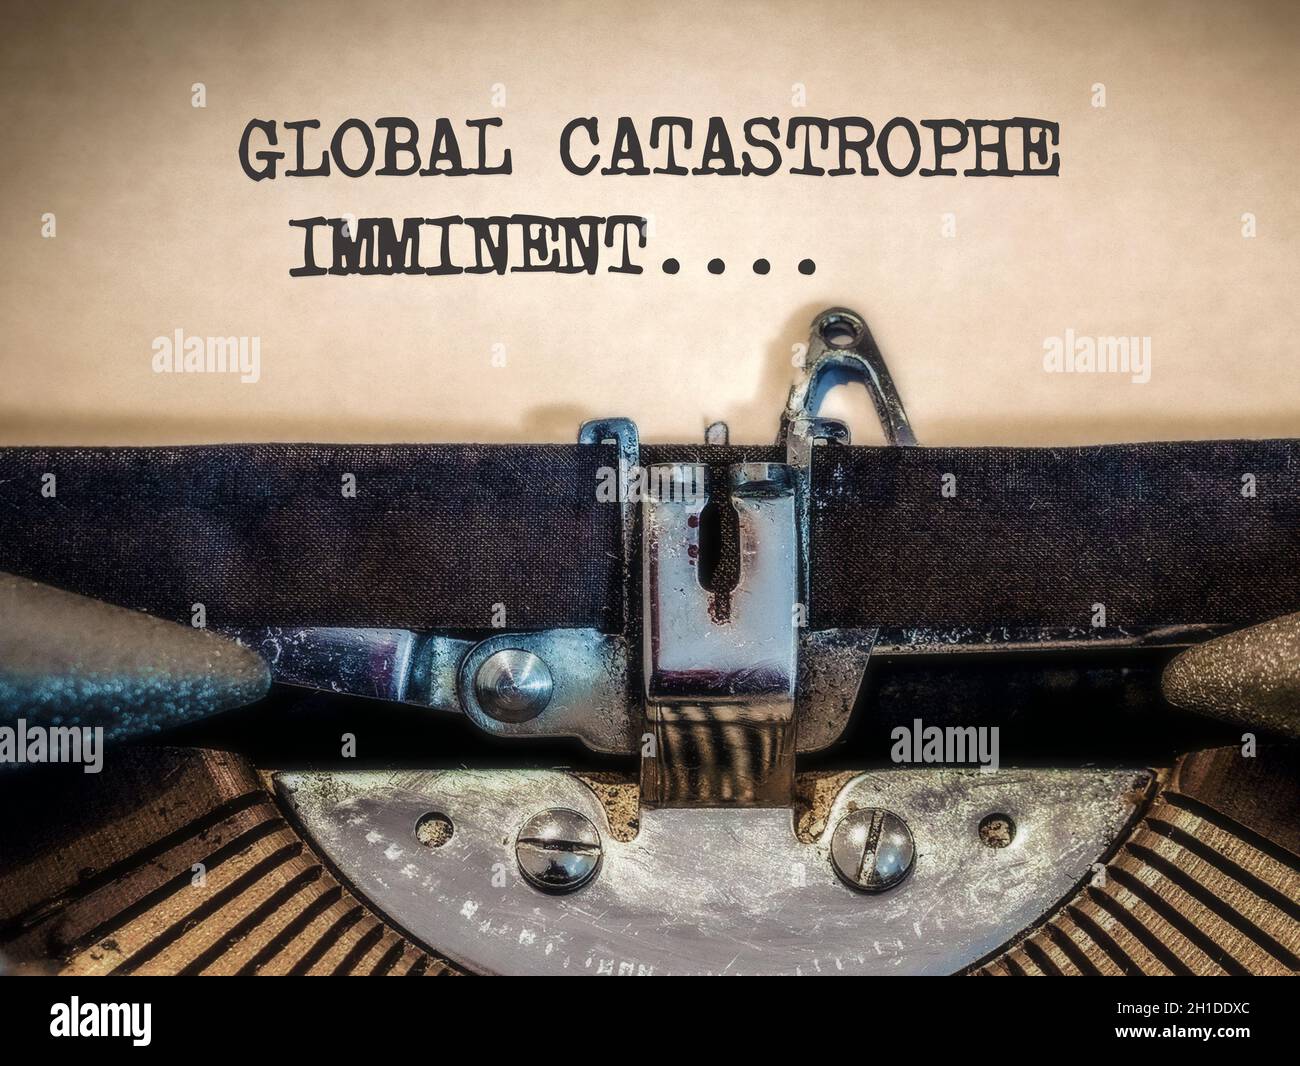 Global catastrophe imminent displayed on a Vintage Typewriter Stock Photo